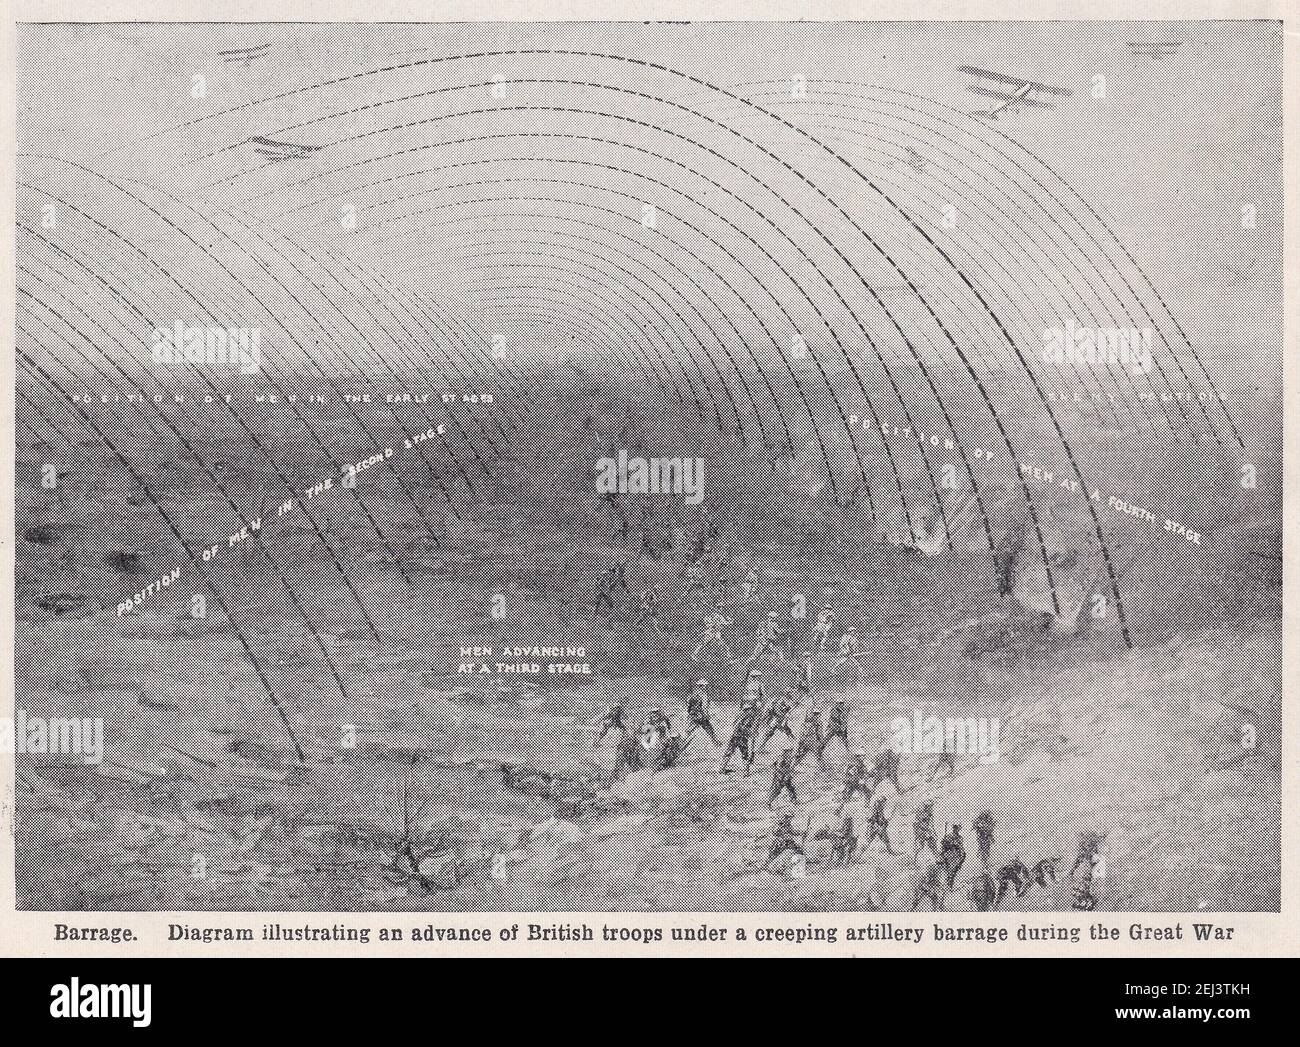 Barrage - Diagram illustrating an advance of British troops under a creeping artillery barrage during the Great War. Stock Photo